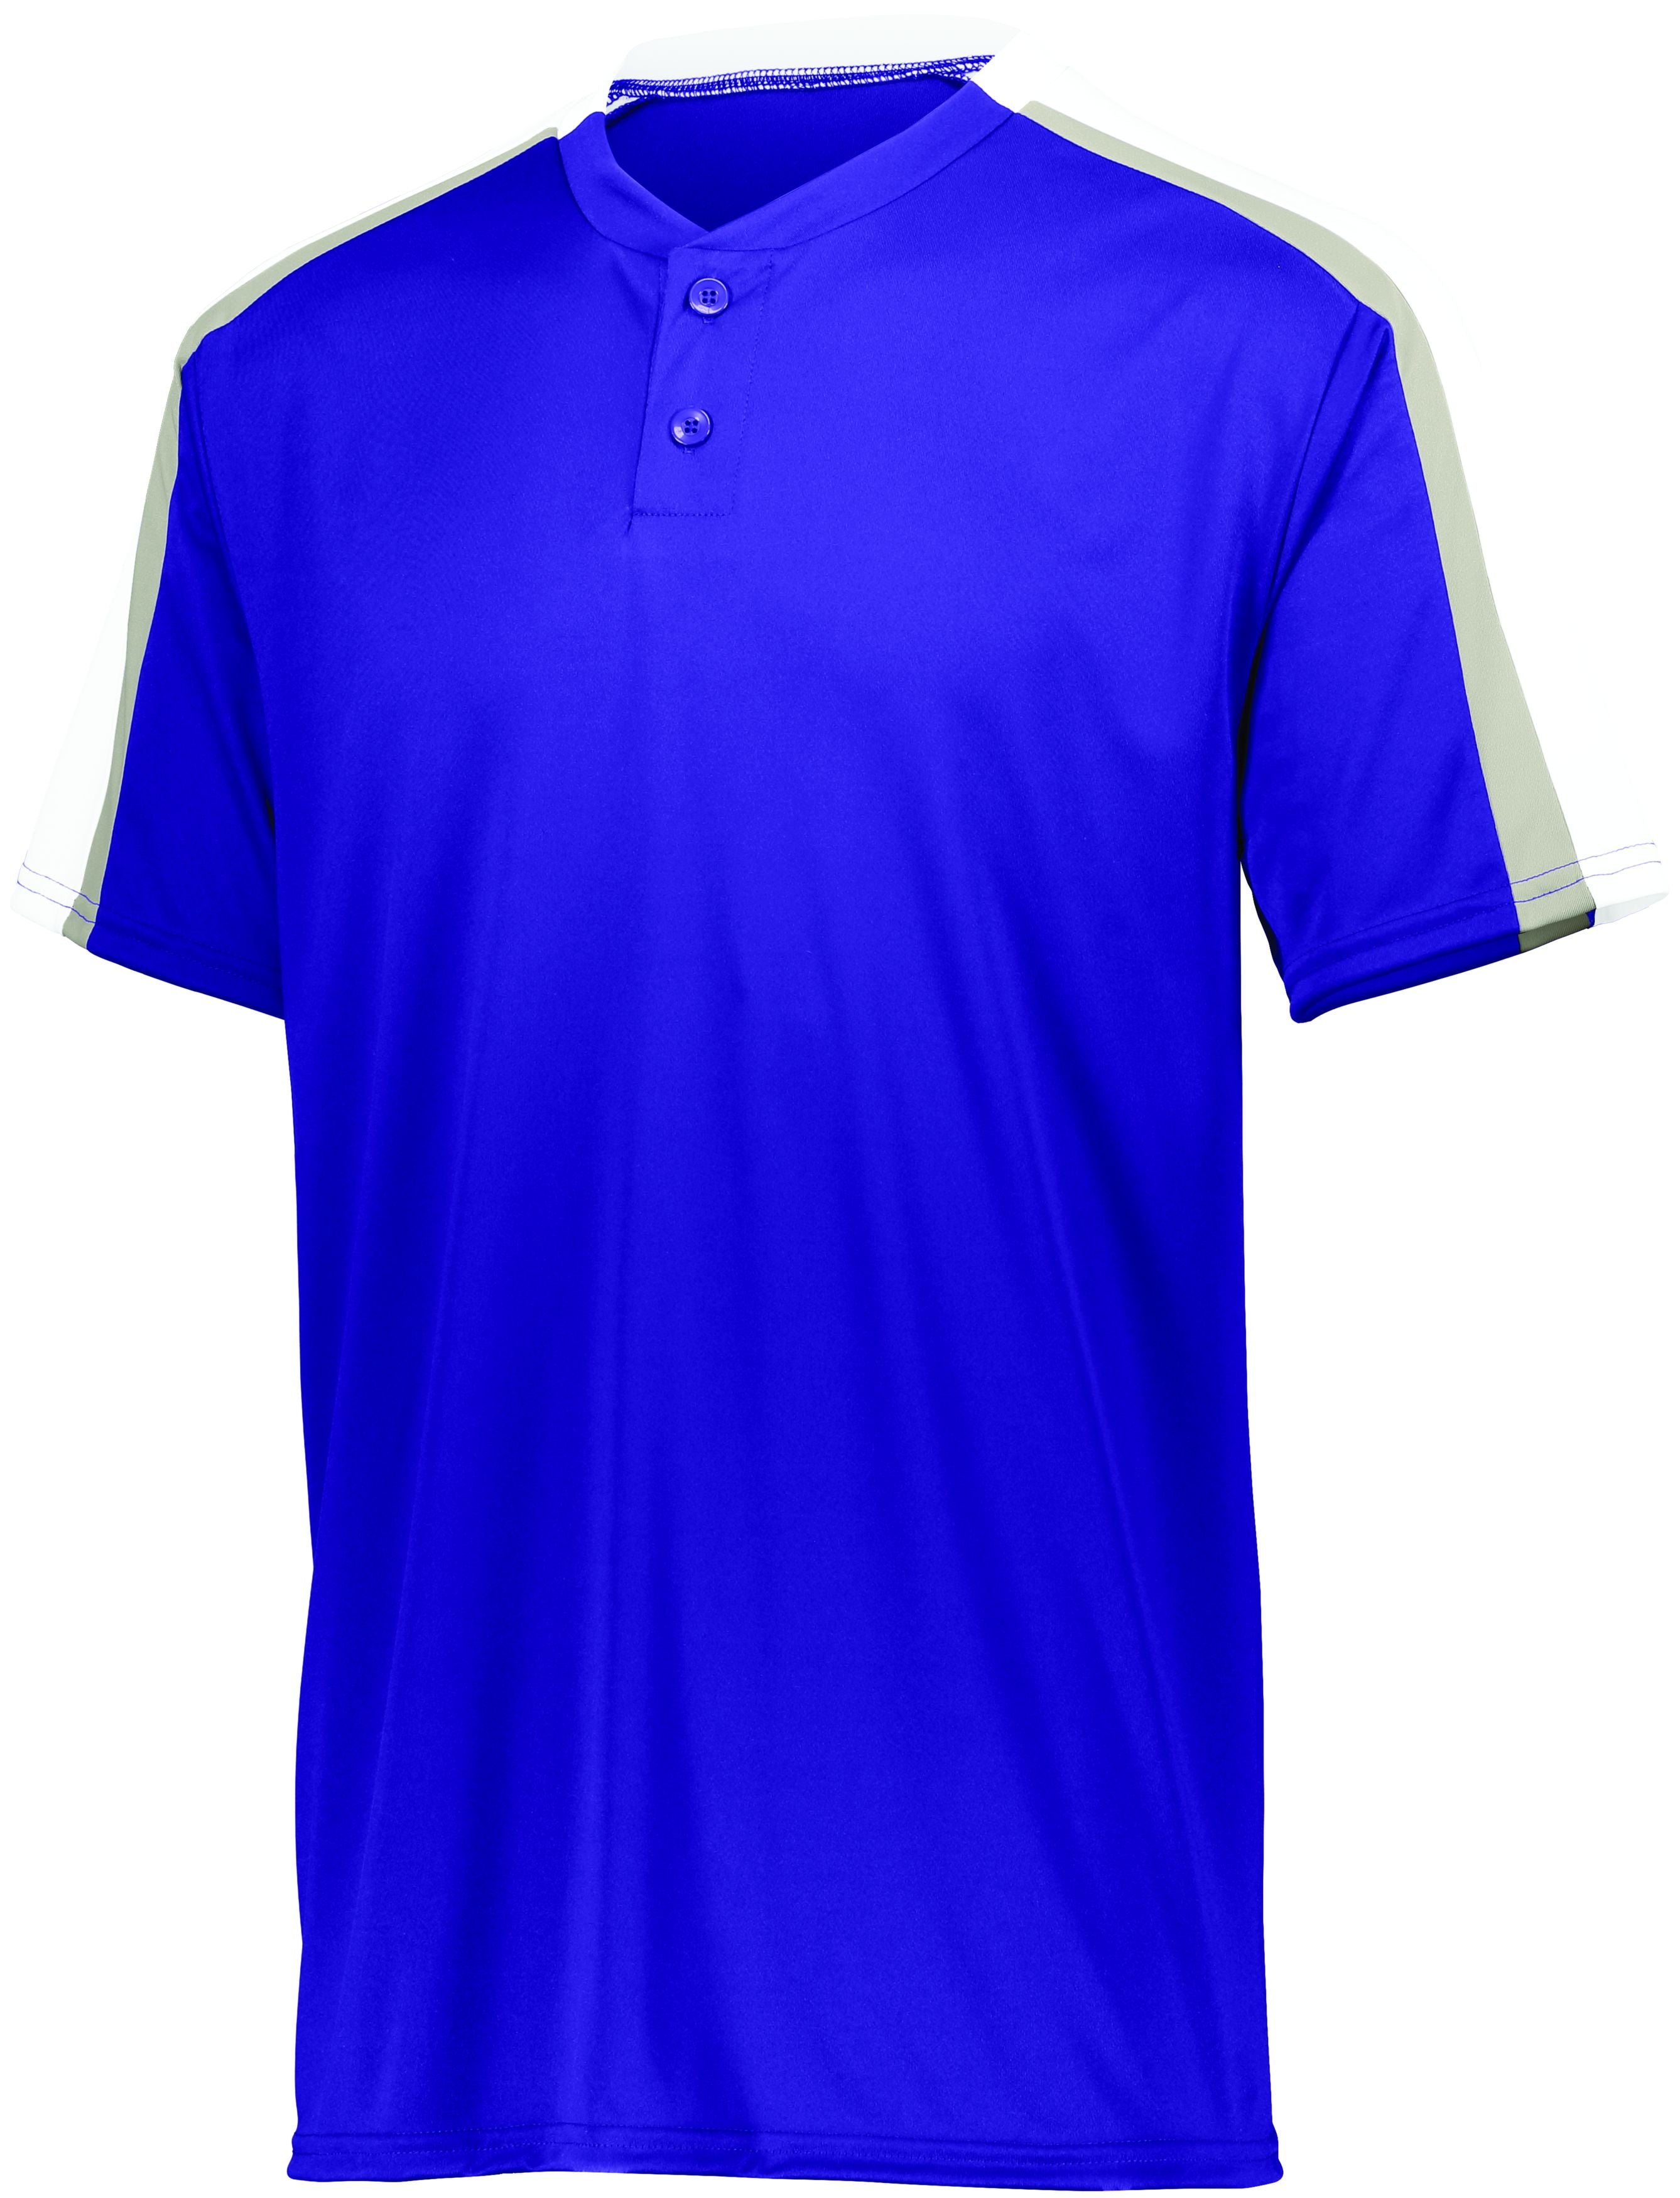 Augusta Sportswear Power Plus Jersey 2.0 in Purple/White/Silver Grey  -Part of the Adult, Adult-Jersey, Augusta-Products, Baseball, Shirts, All-Sports, All-Sports-1 product lines at KanaleyCreations.com